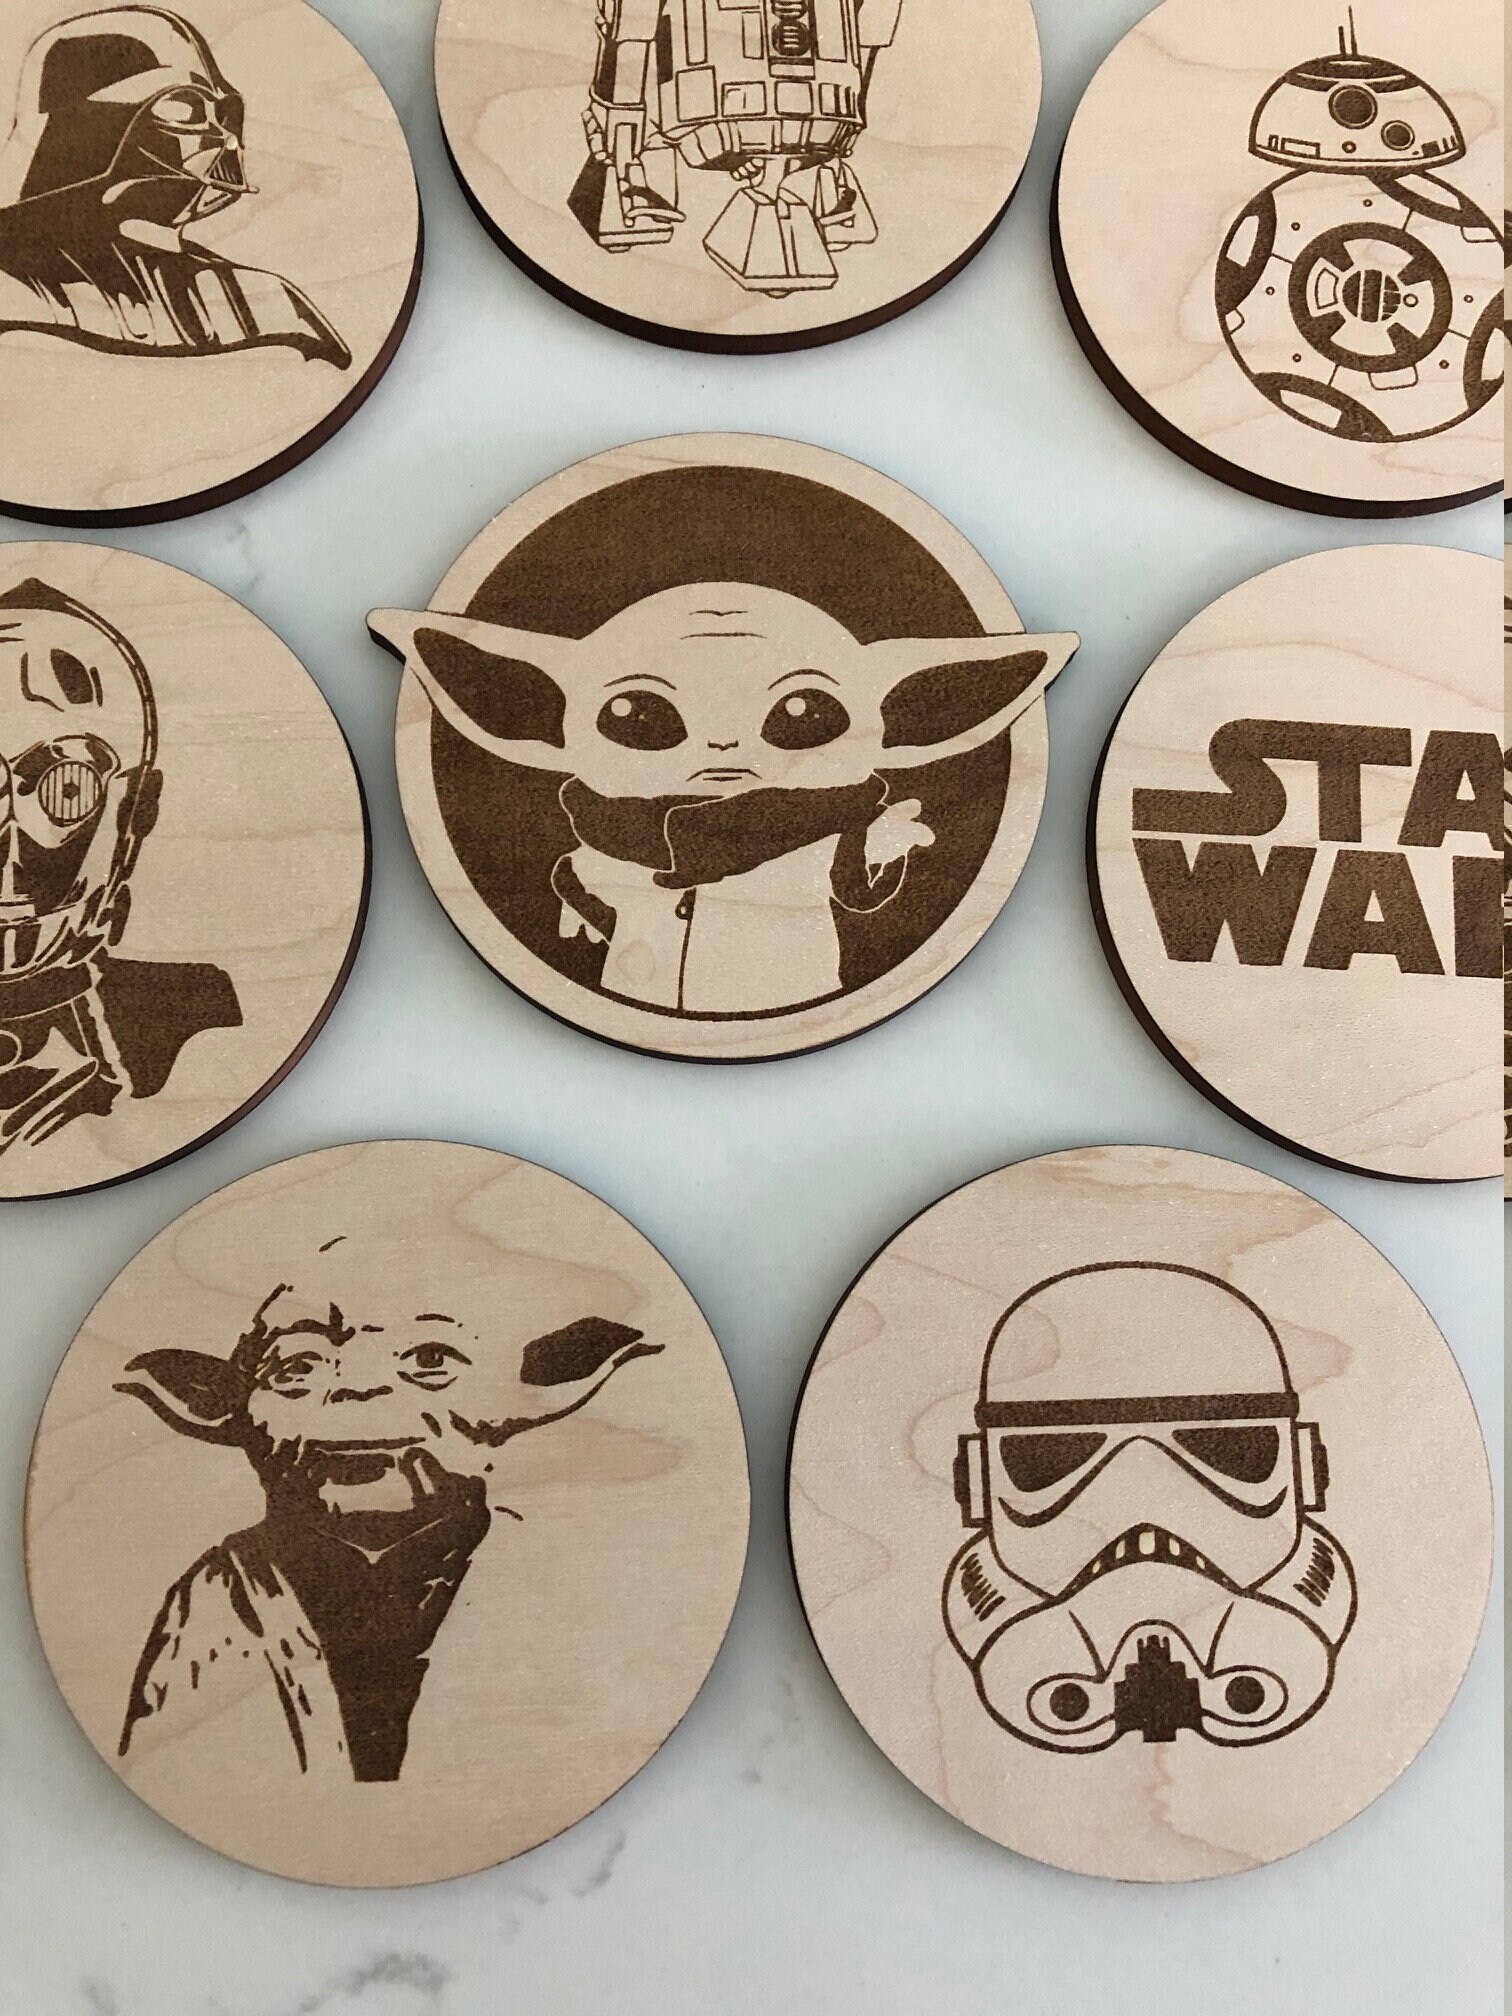 Star Wars Fans - Star Wars Coasters, Set of 4 - Cork with Laser Cut Steel  Rebel and Imperial Logos - 4 Round  (via )